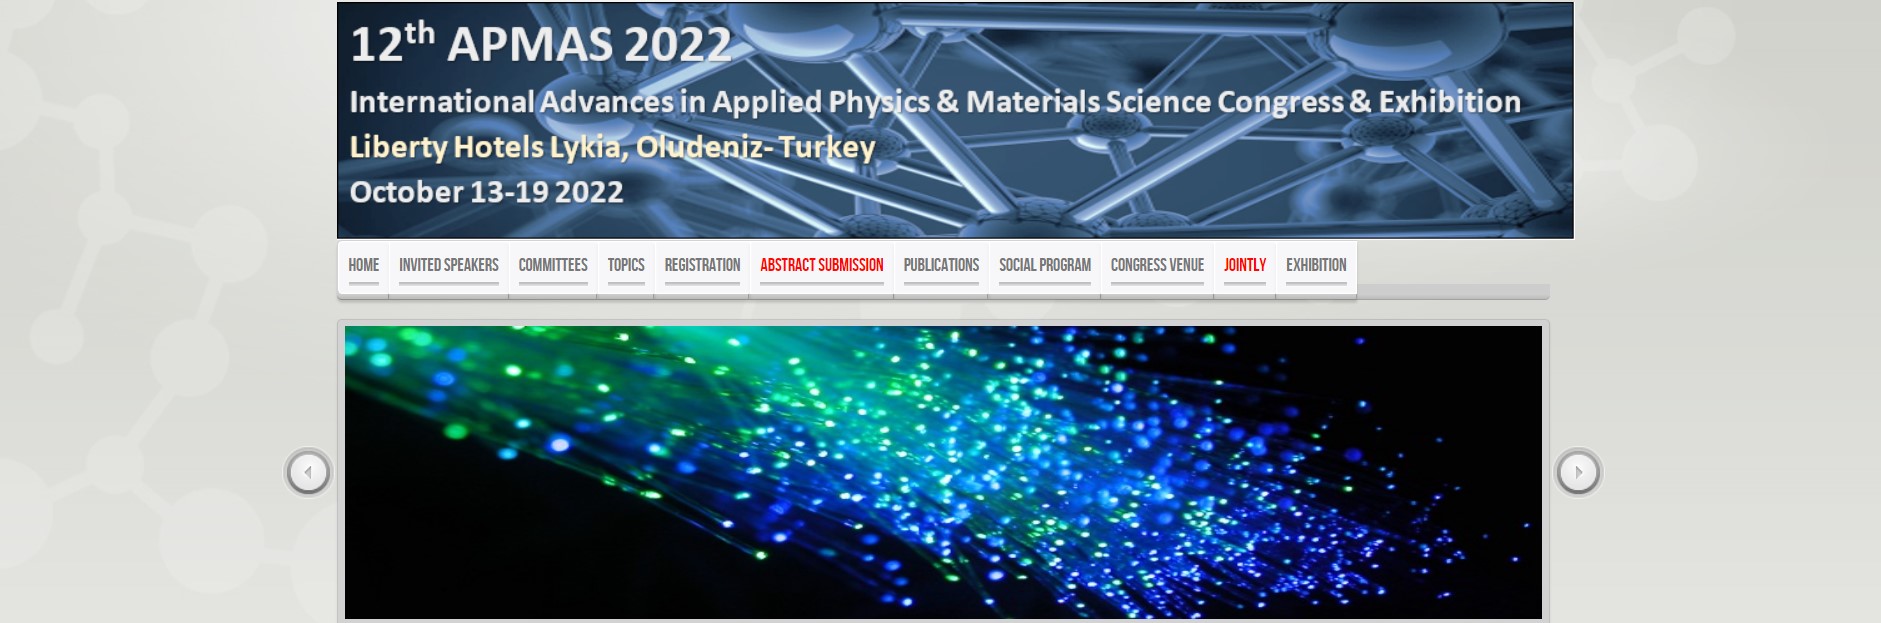 12. International Advances in Applied Physics and Materials Science Congress and Exhibition – APMAS 2022